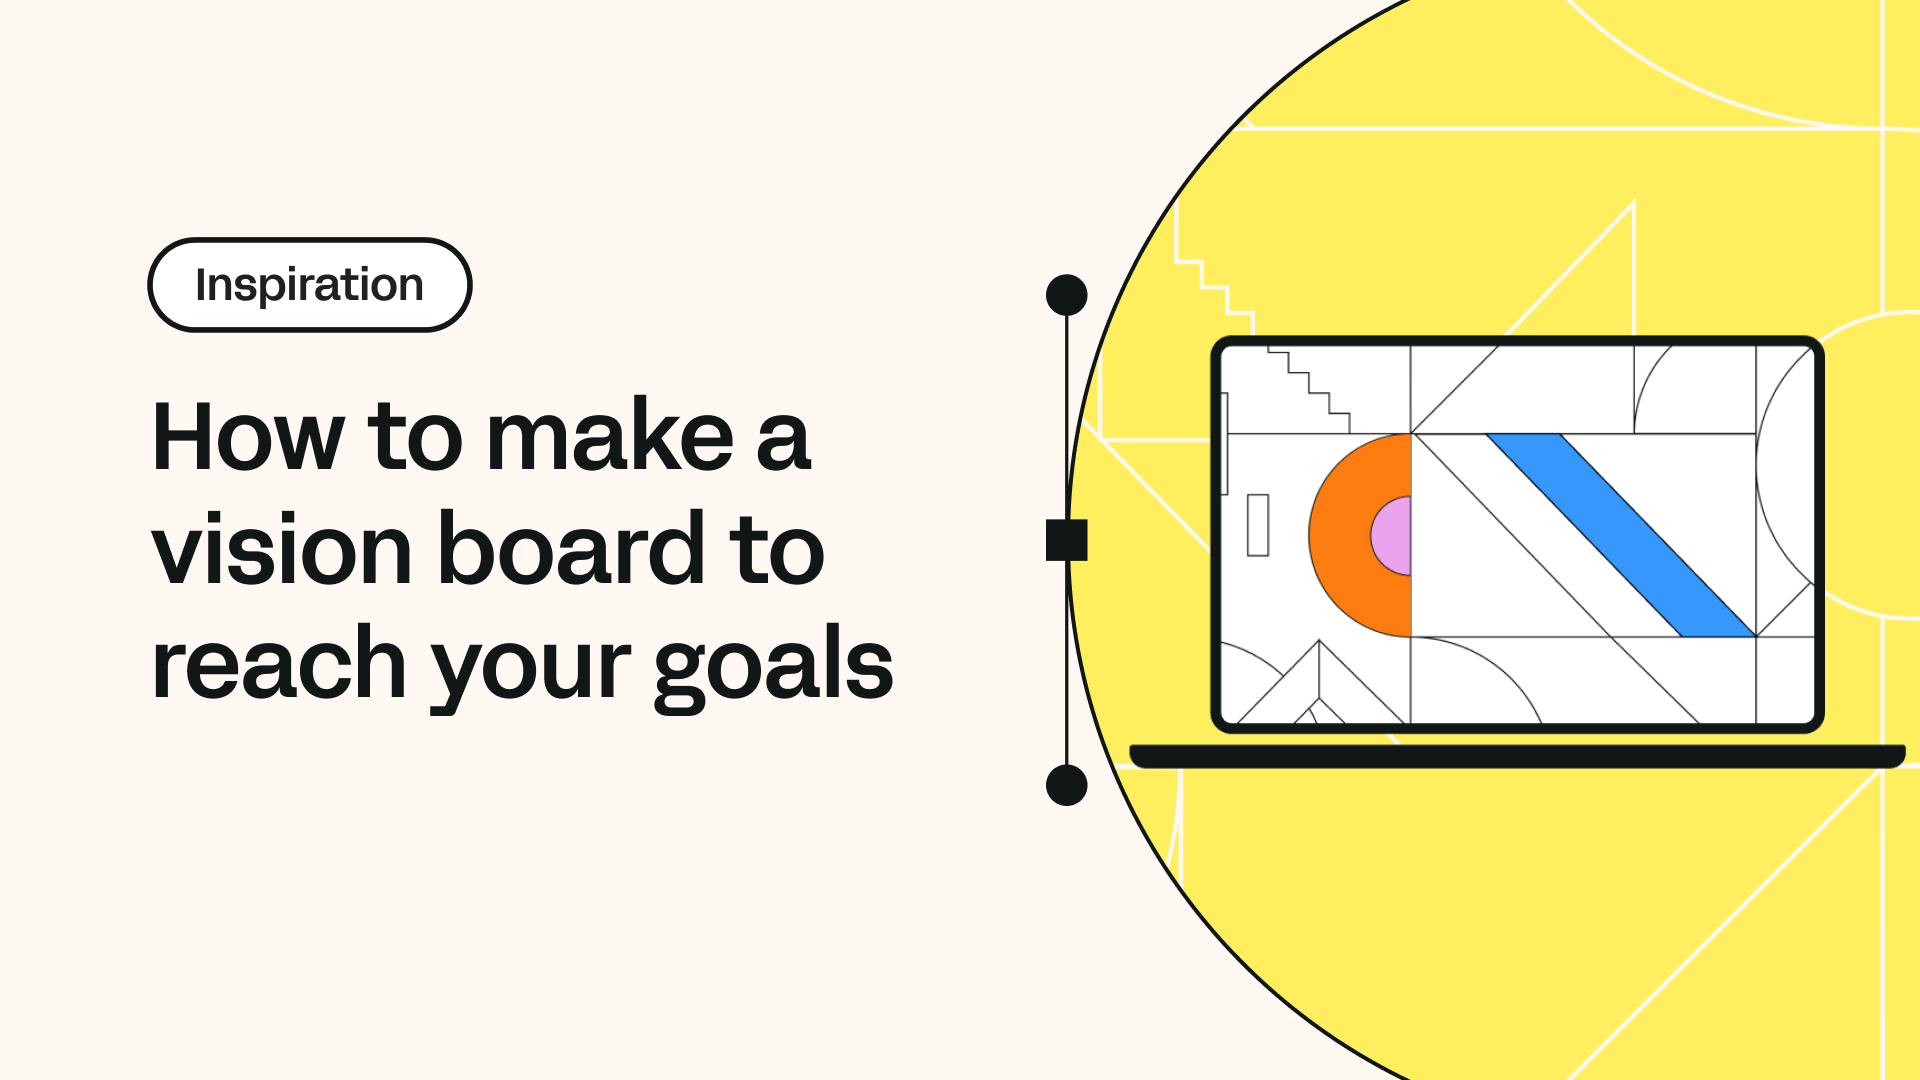 How to make a vision board to reach your goals | Linearity